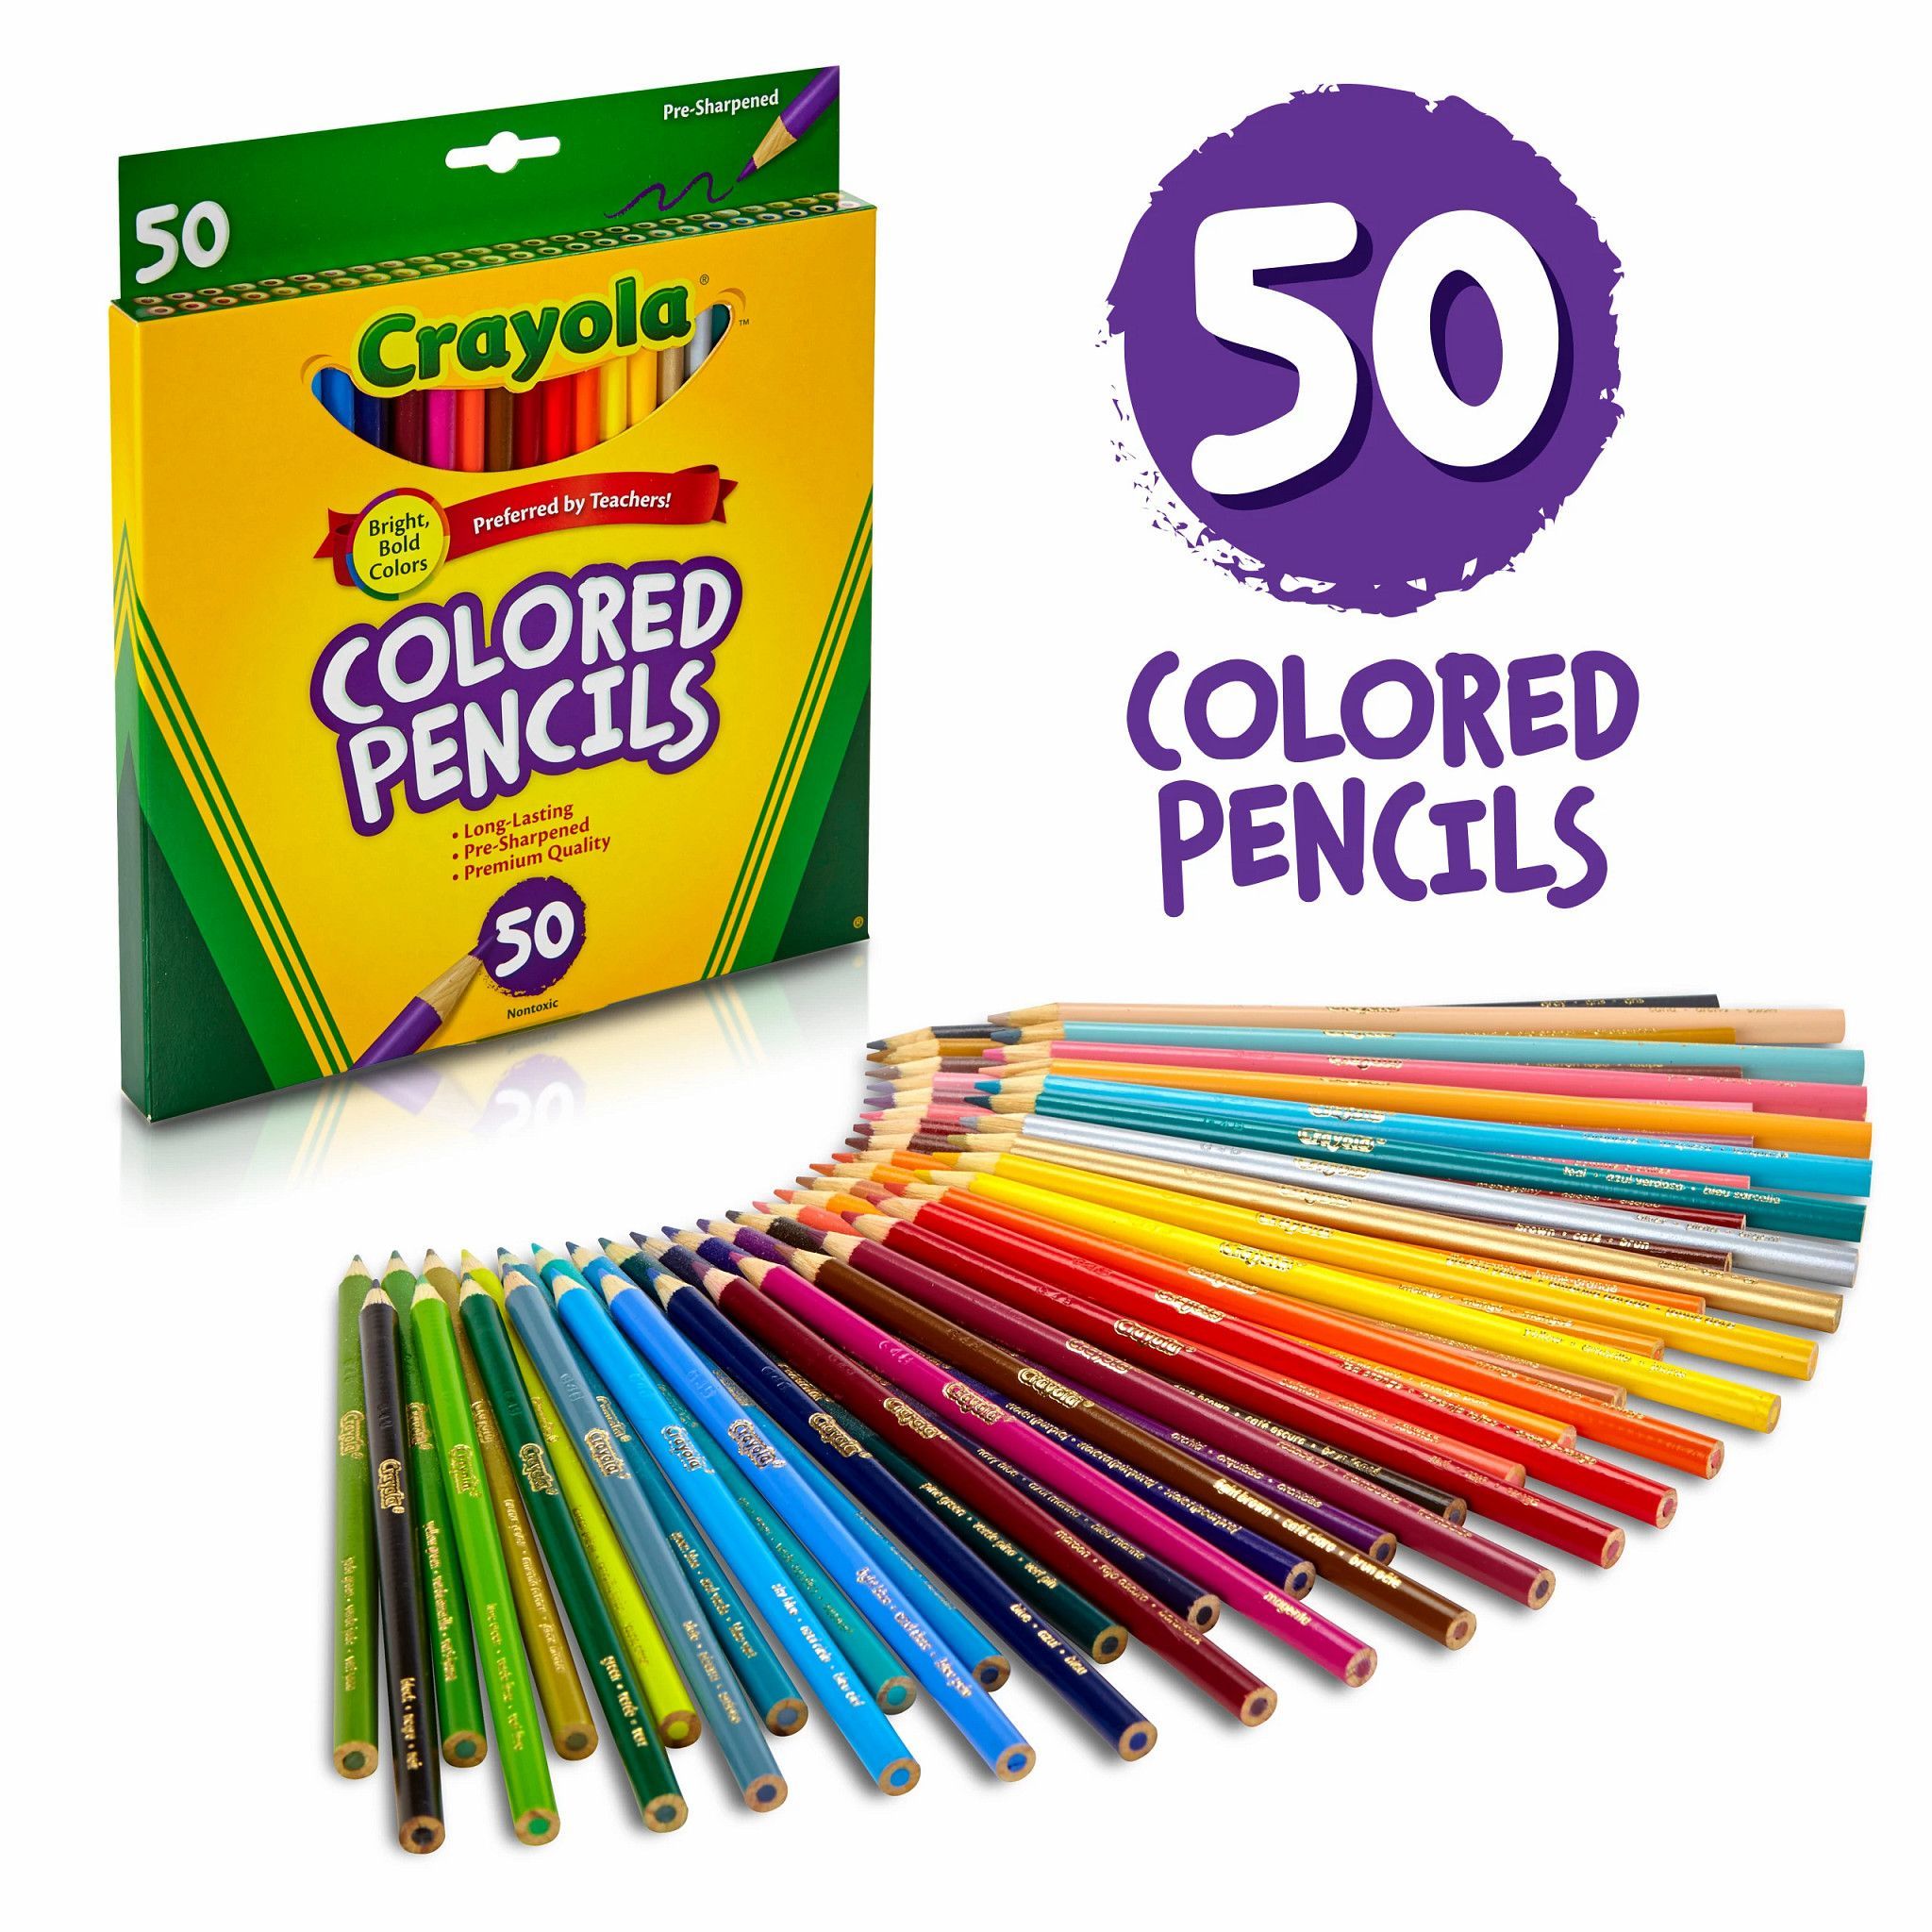 Crayola Colored Pencil Set, 50 Ct, Back to School Supplies for Teachers, Asstd Colors, Beginner Child - image 6 of 10